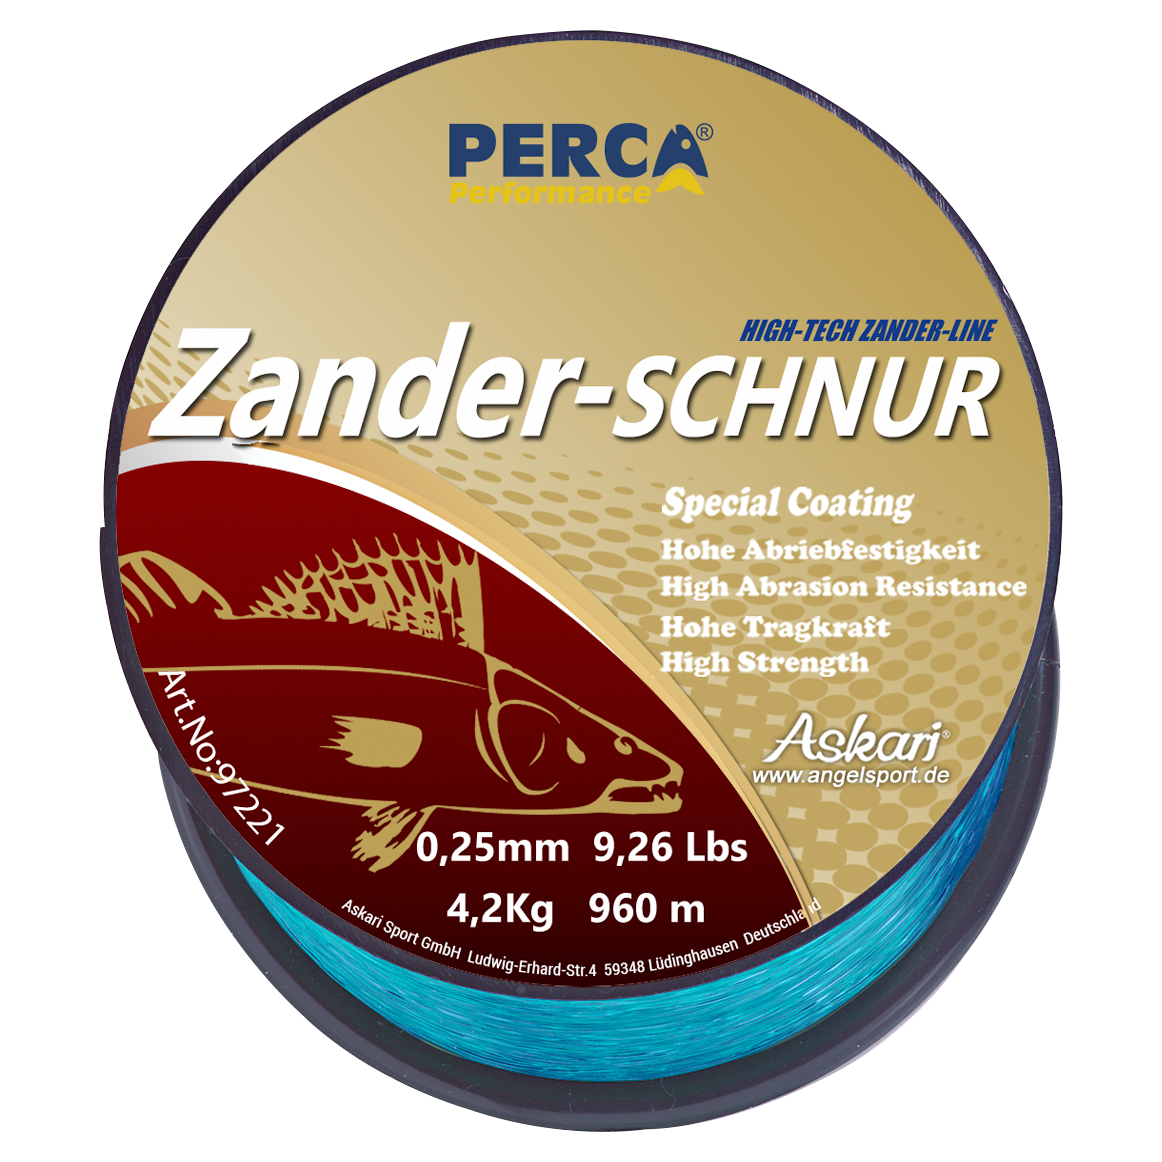 Perca Performance Fishing Line Performance HI Strength (clear, Large Spool)  at low prices